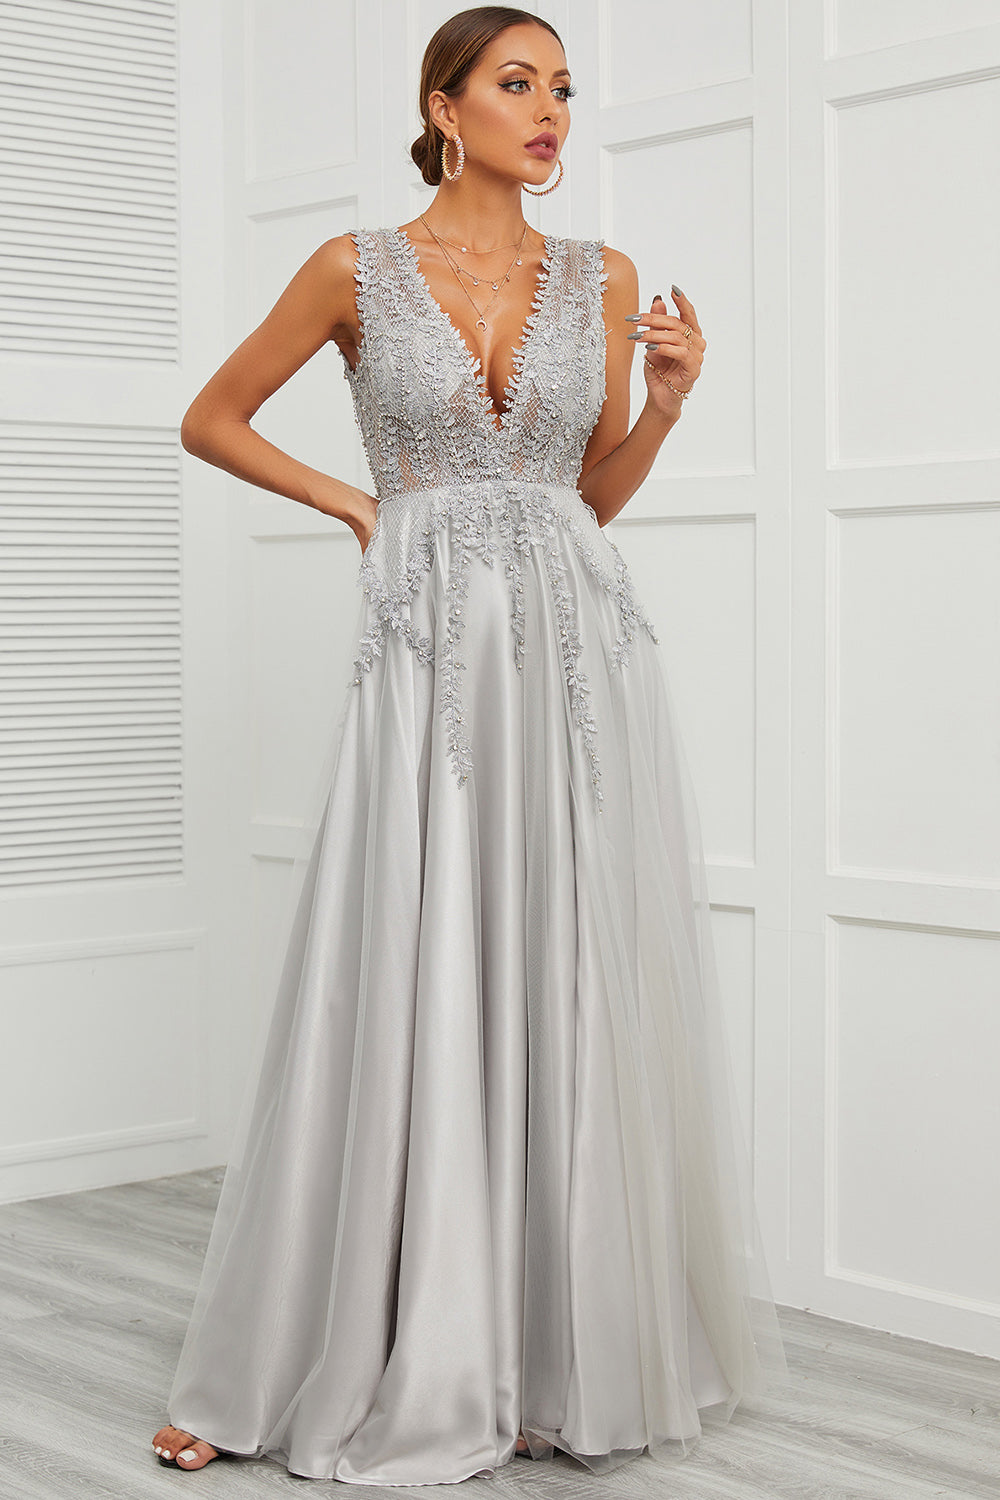 Deep V Neck Grey Long Ball Dress with Appliques